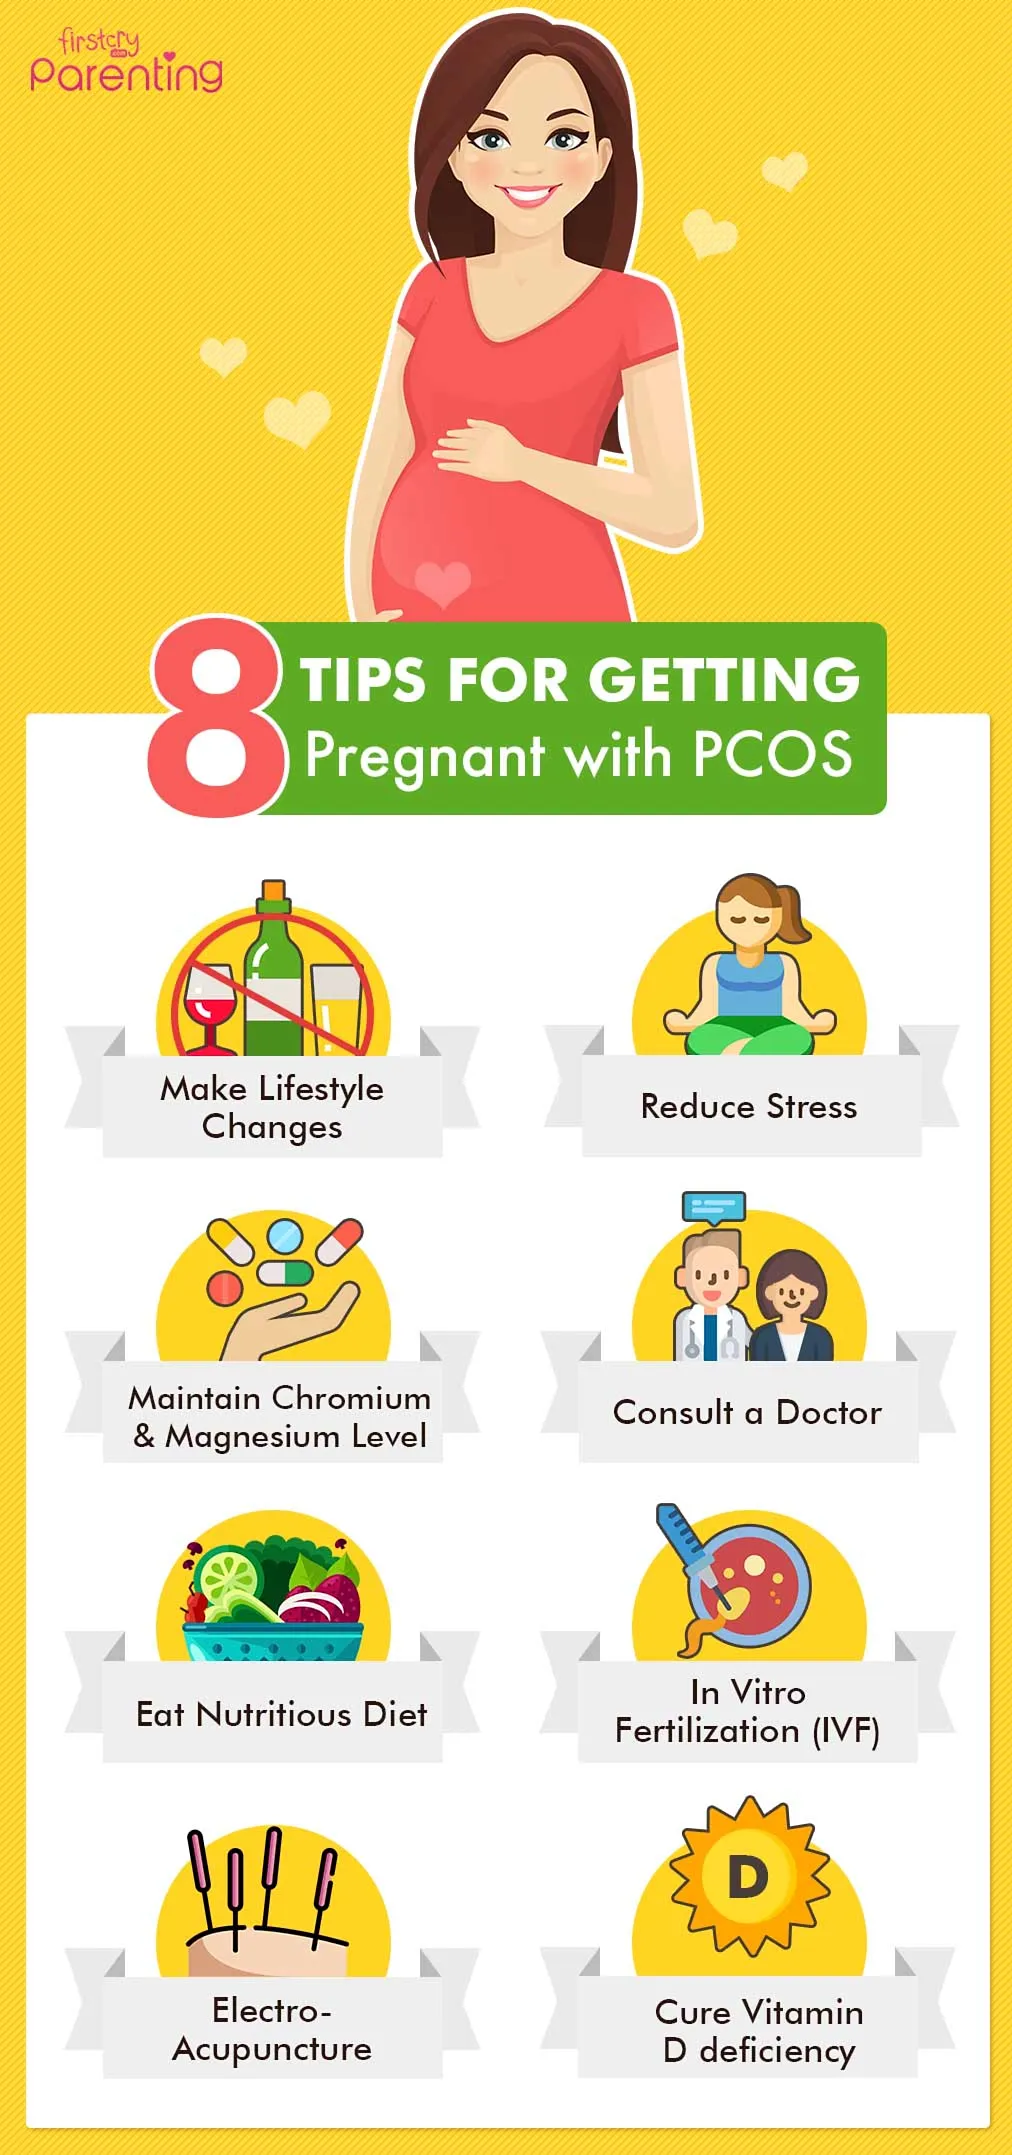 8 Tips For Getting Pregnant With PCOS.webp